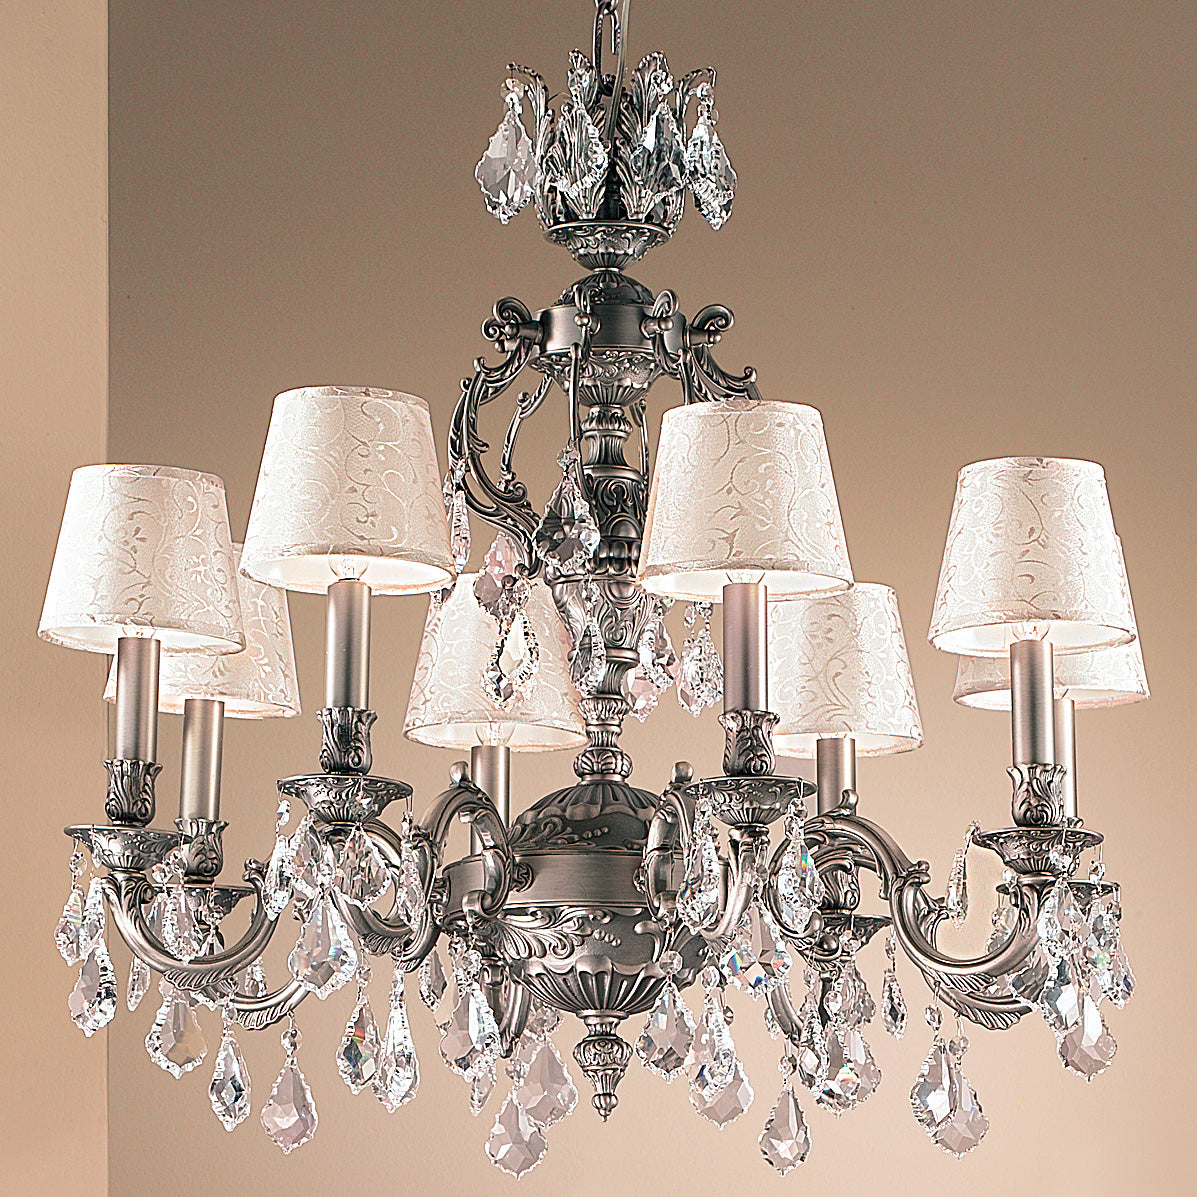 Classic Lighting 57378 AGP SC Chateau Crystal Chandelier in Aged Pewter (Imported from Spain)